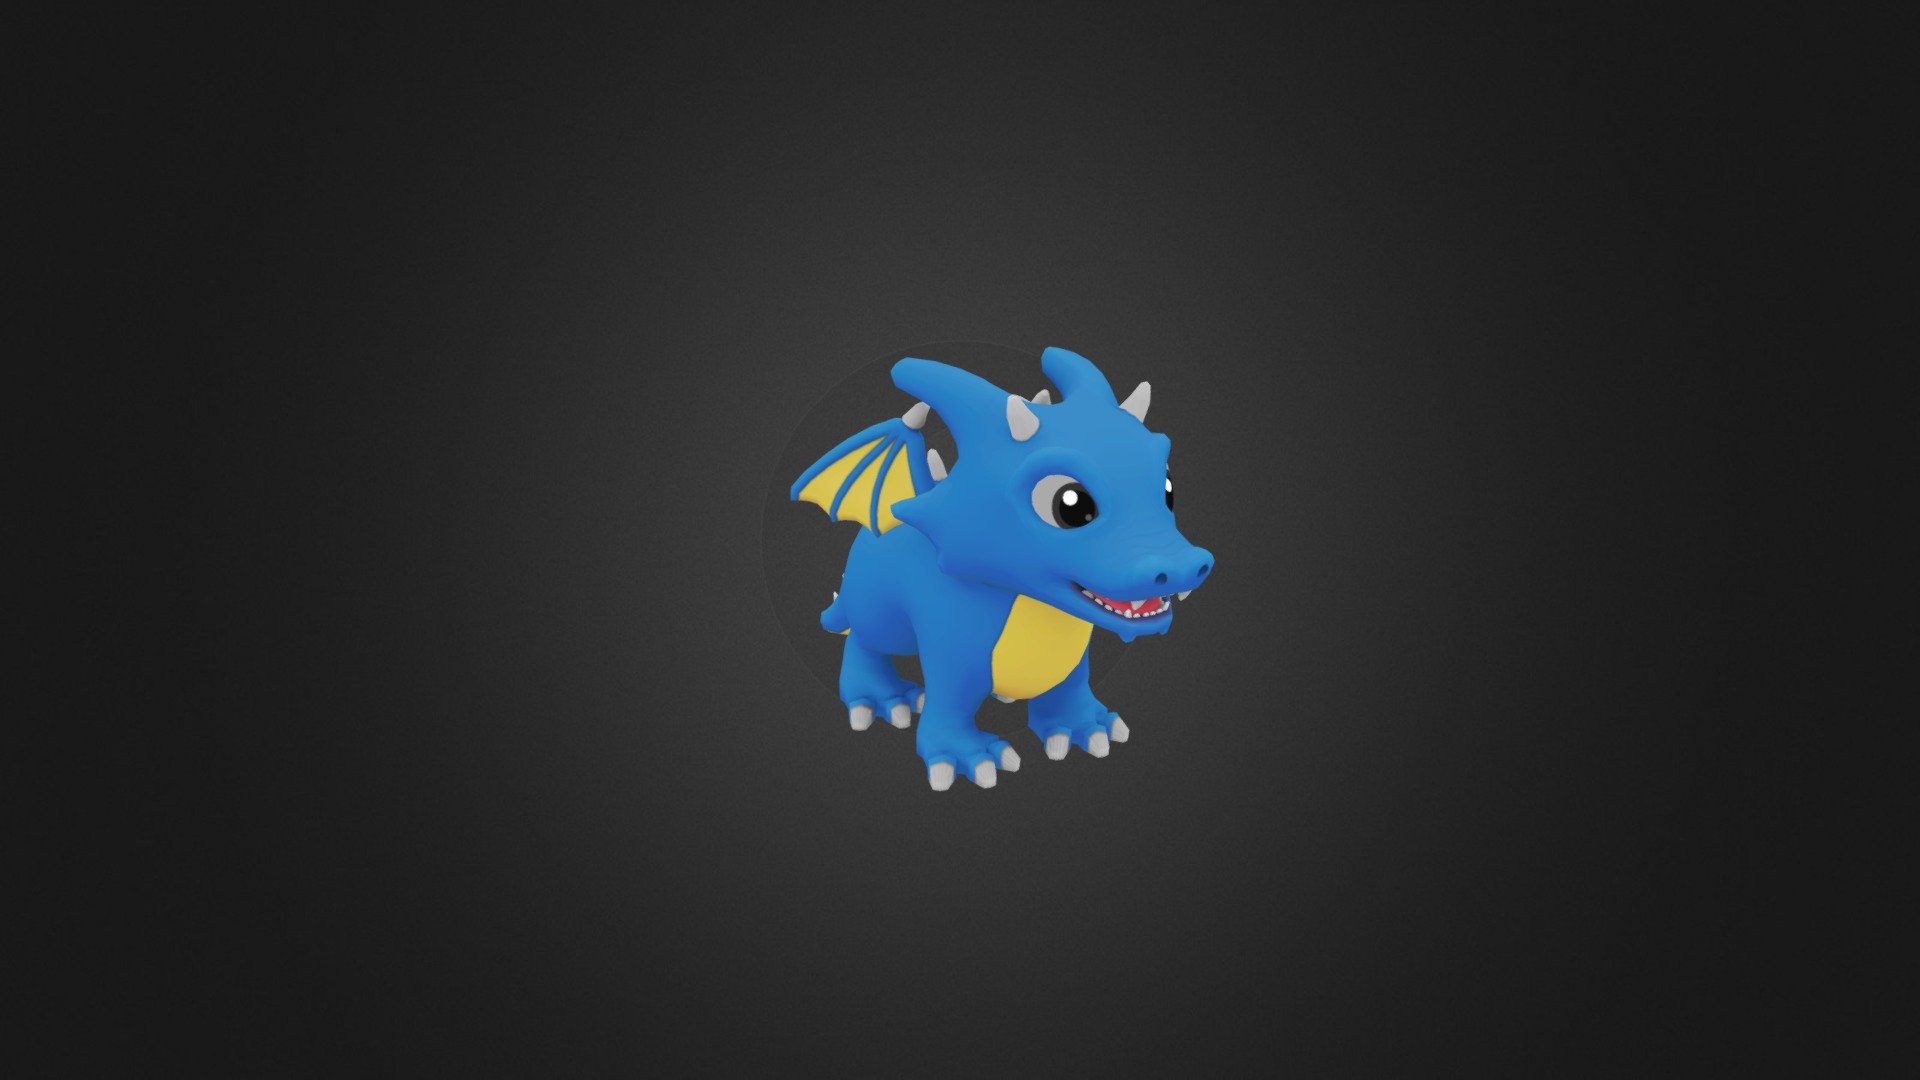 This is a low poly, game-ready stylized chibi/cute dragon that is fully IK-rigged and animated.
It's eyes can look in all directions using UV Offset animation (can't be shown in .FBX unfortunately!).

The texture for the eyes can easily be replaced to create a variety of cartoony eye effects (like swirly dizzy eyes, if you wish).

The model uses 6188 Triangles and a diffuse texture.

There are 10 colour variations included (Orange, Black, Purple, Green, Blue, Red, White, Yellow, Pink &amp; Teal) - Little Dragon - Buy Royalty Free 3D model by Tom (@tompoon) 3d model